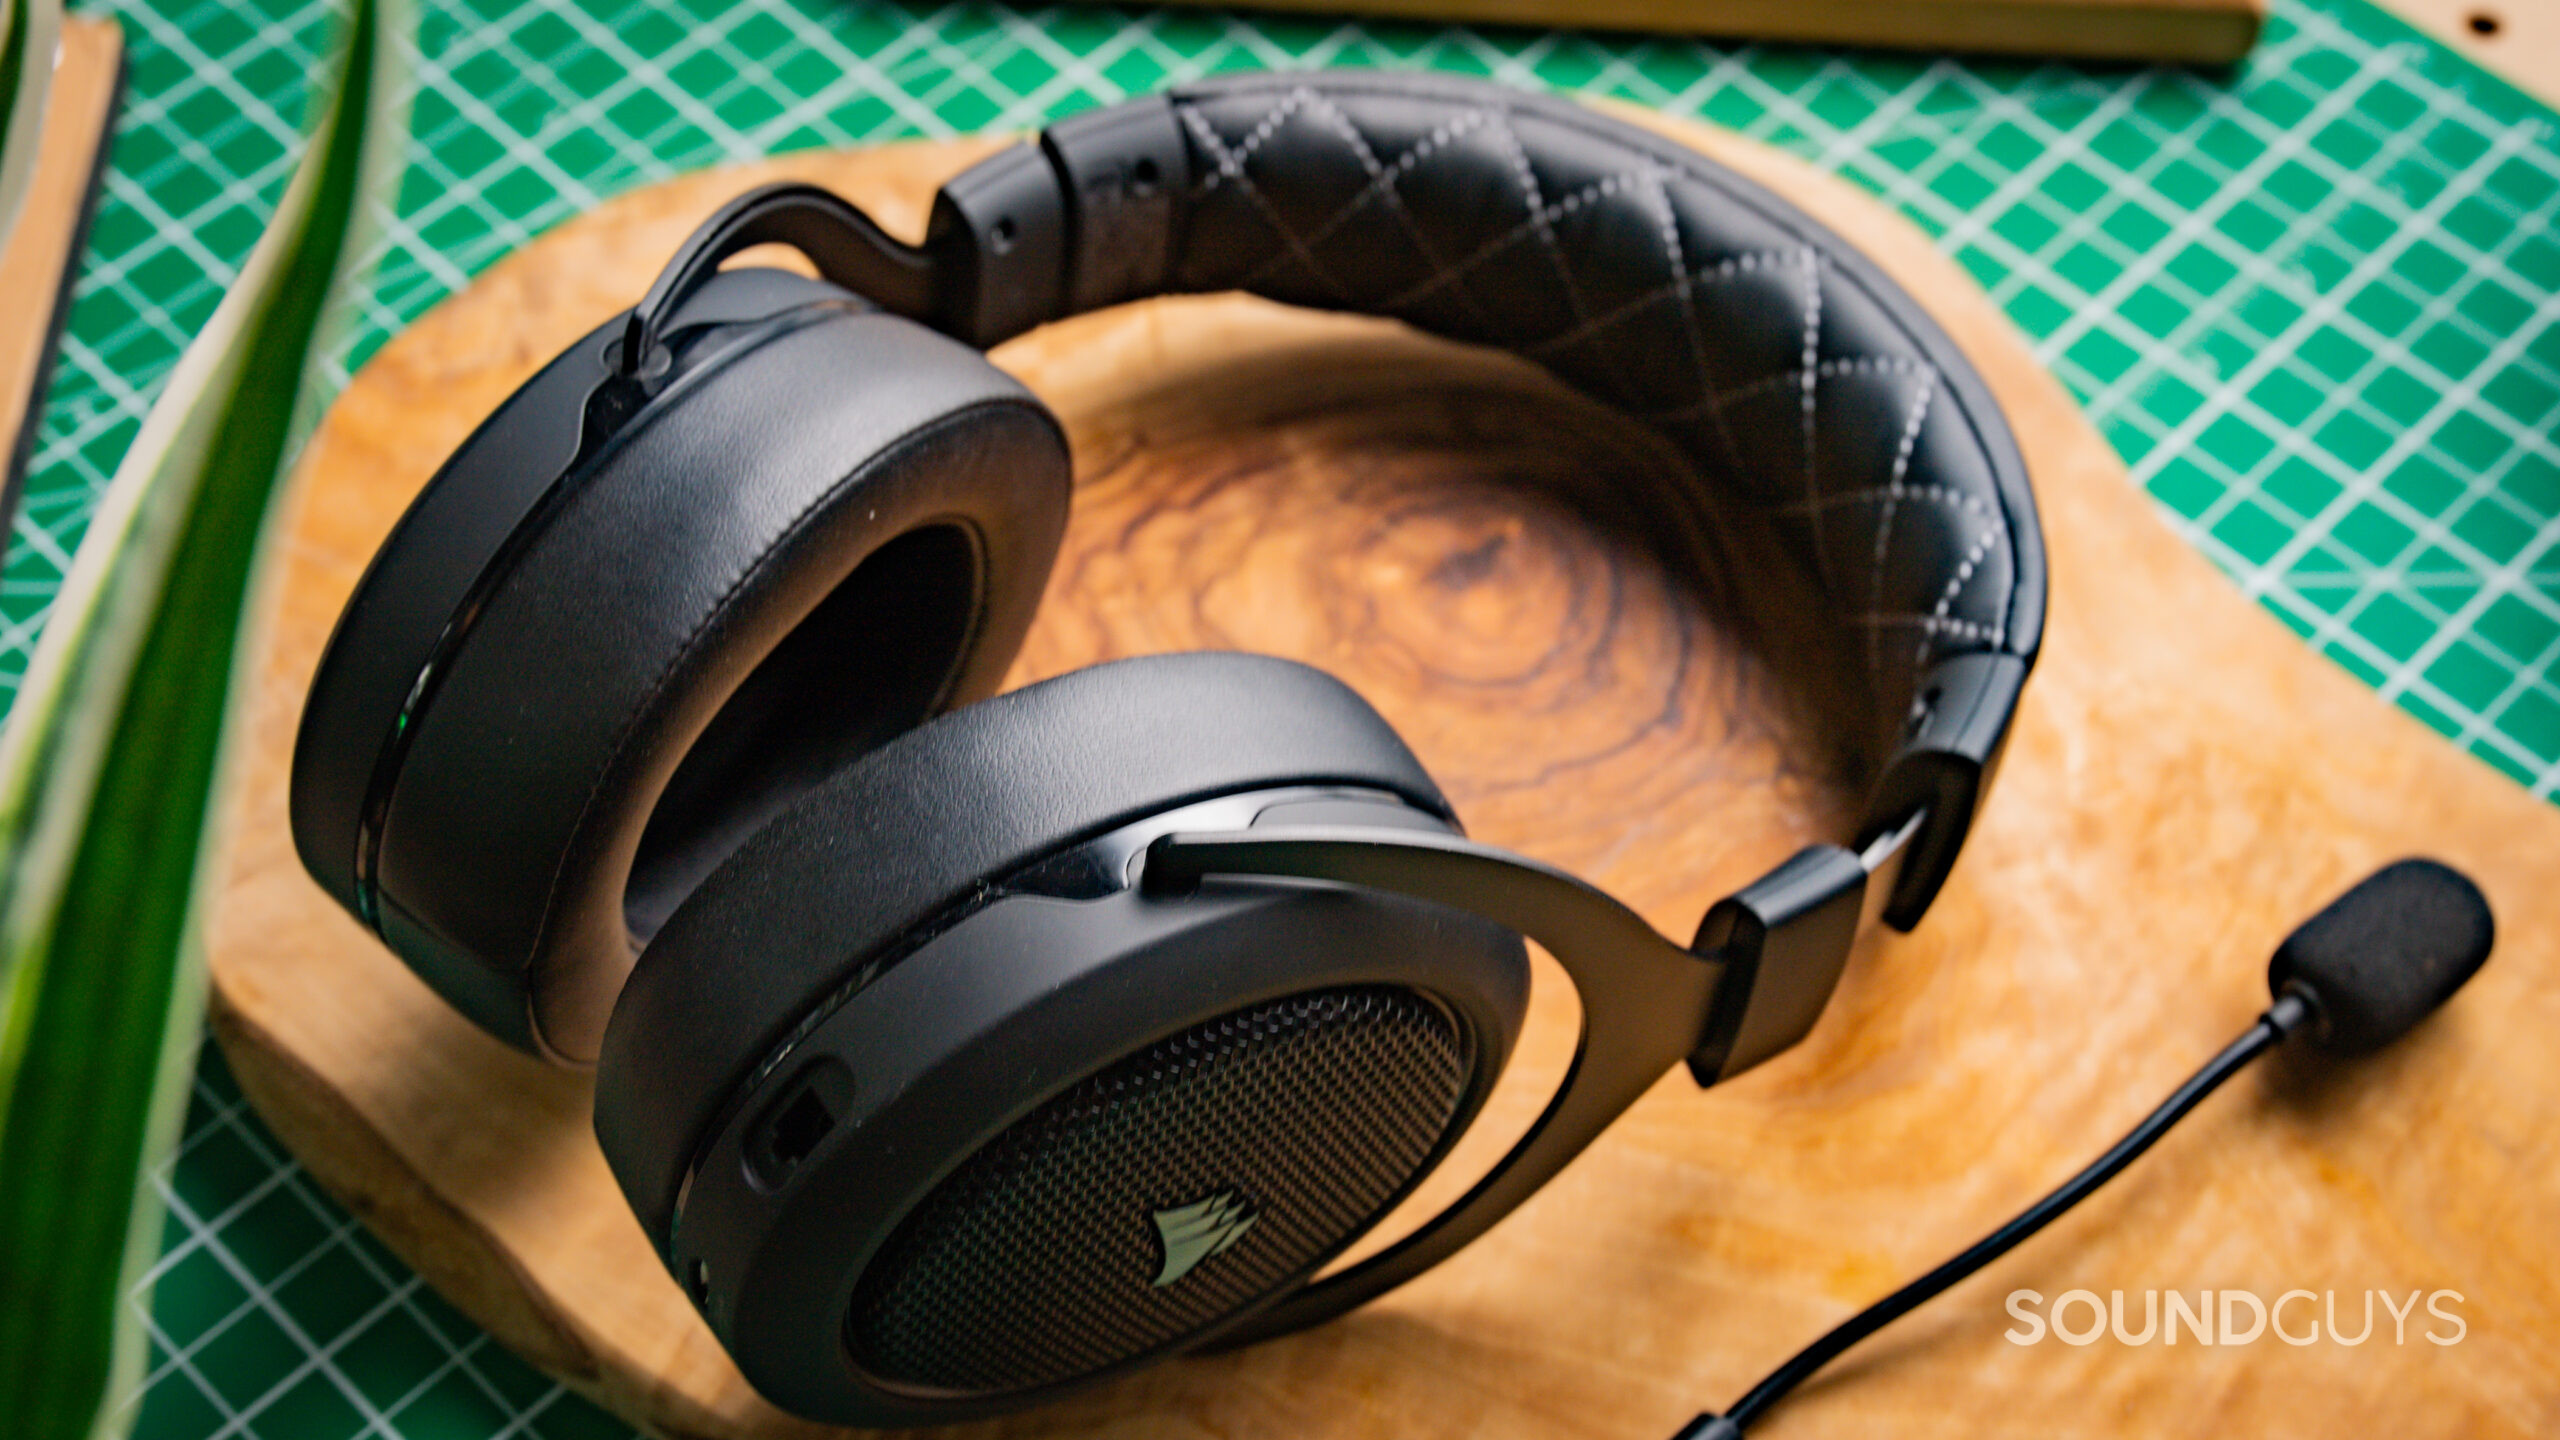 The Corsair HS70 Pro Wireless sitting on a wooden surface at a side angle, with the detachable microphone next to it.